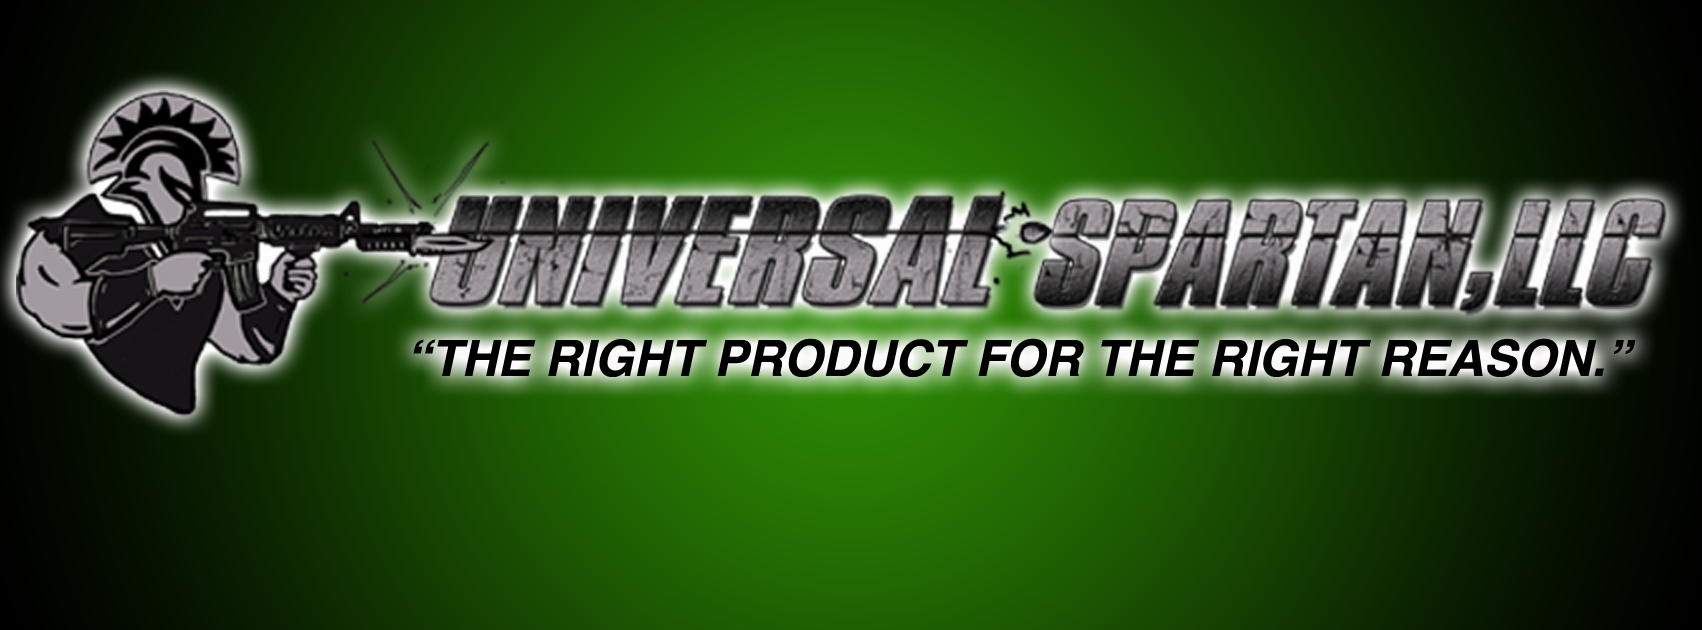 Universal Spartan, LLC. The right product for the right reason.